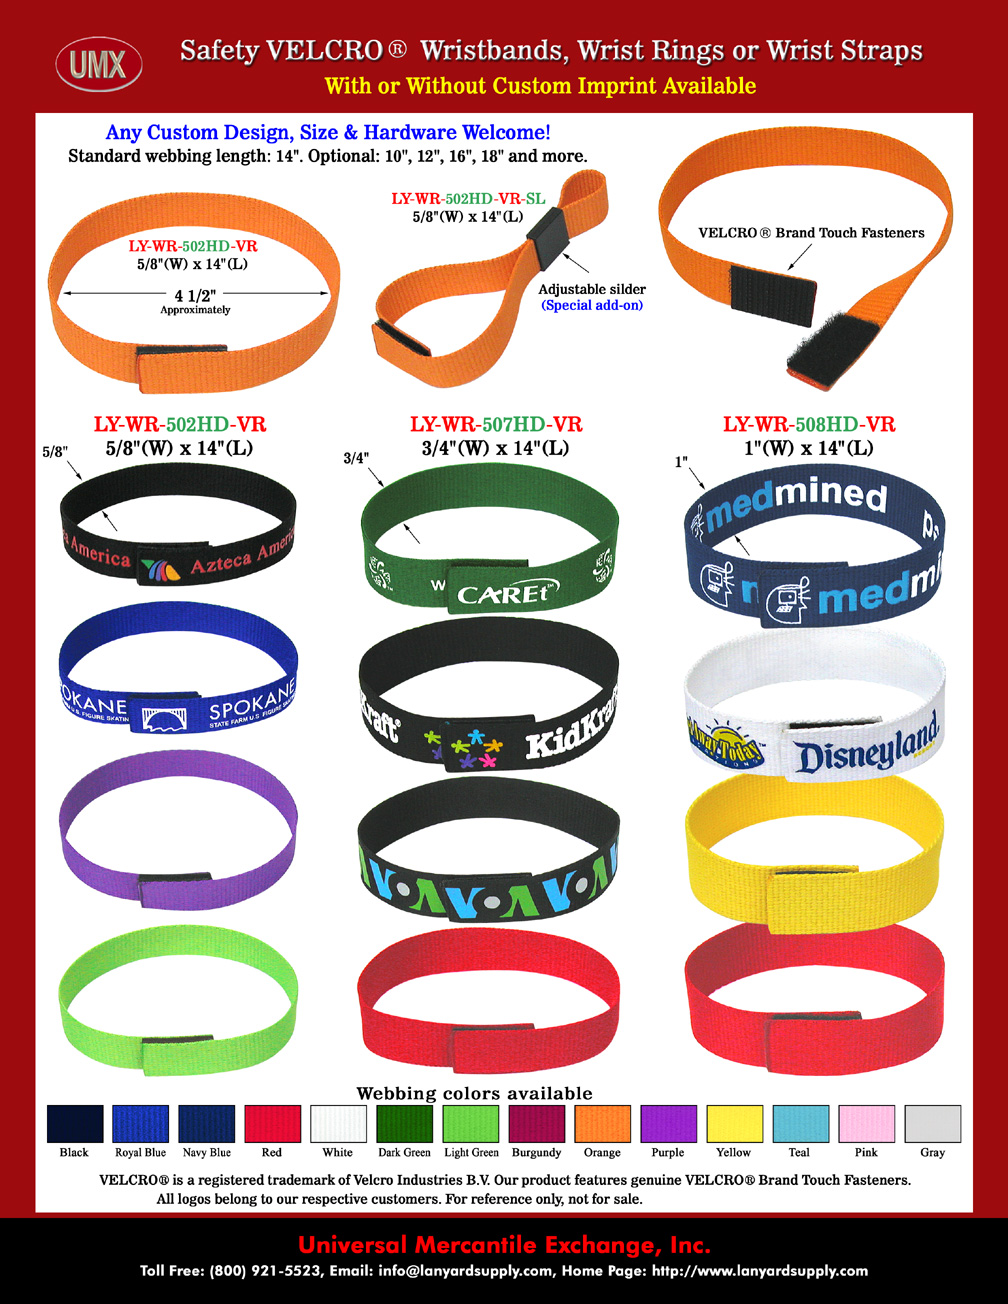 5/8",3/4" and 1" Plain Color Velcro Safety Wristband, Bracelet, Wrist Band, Strap or Ring Lanyard At No Metal..